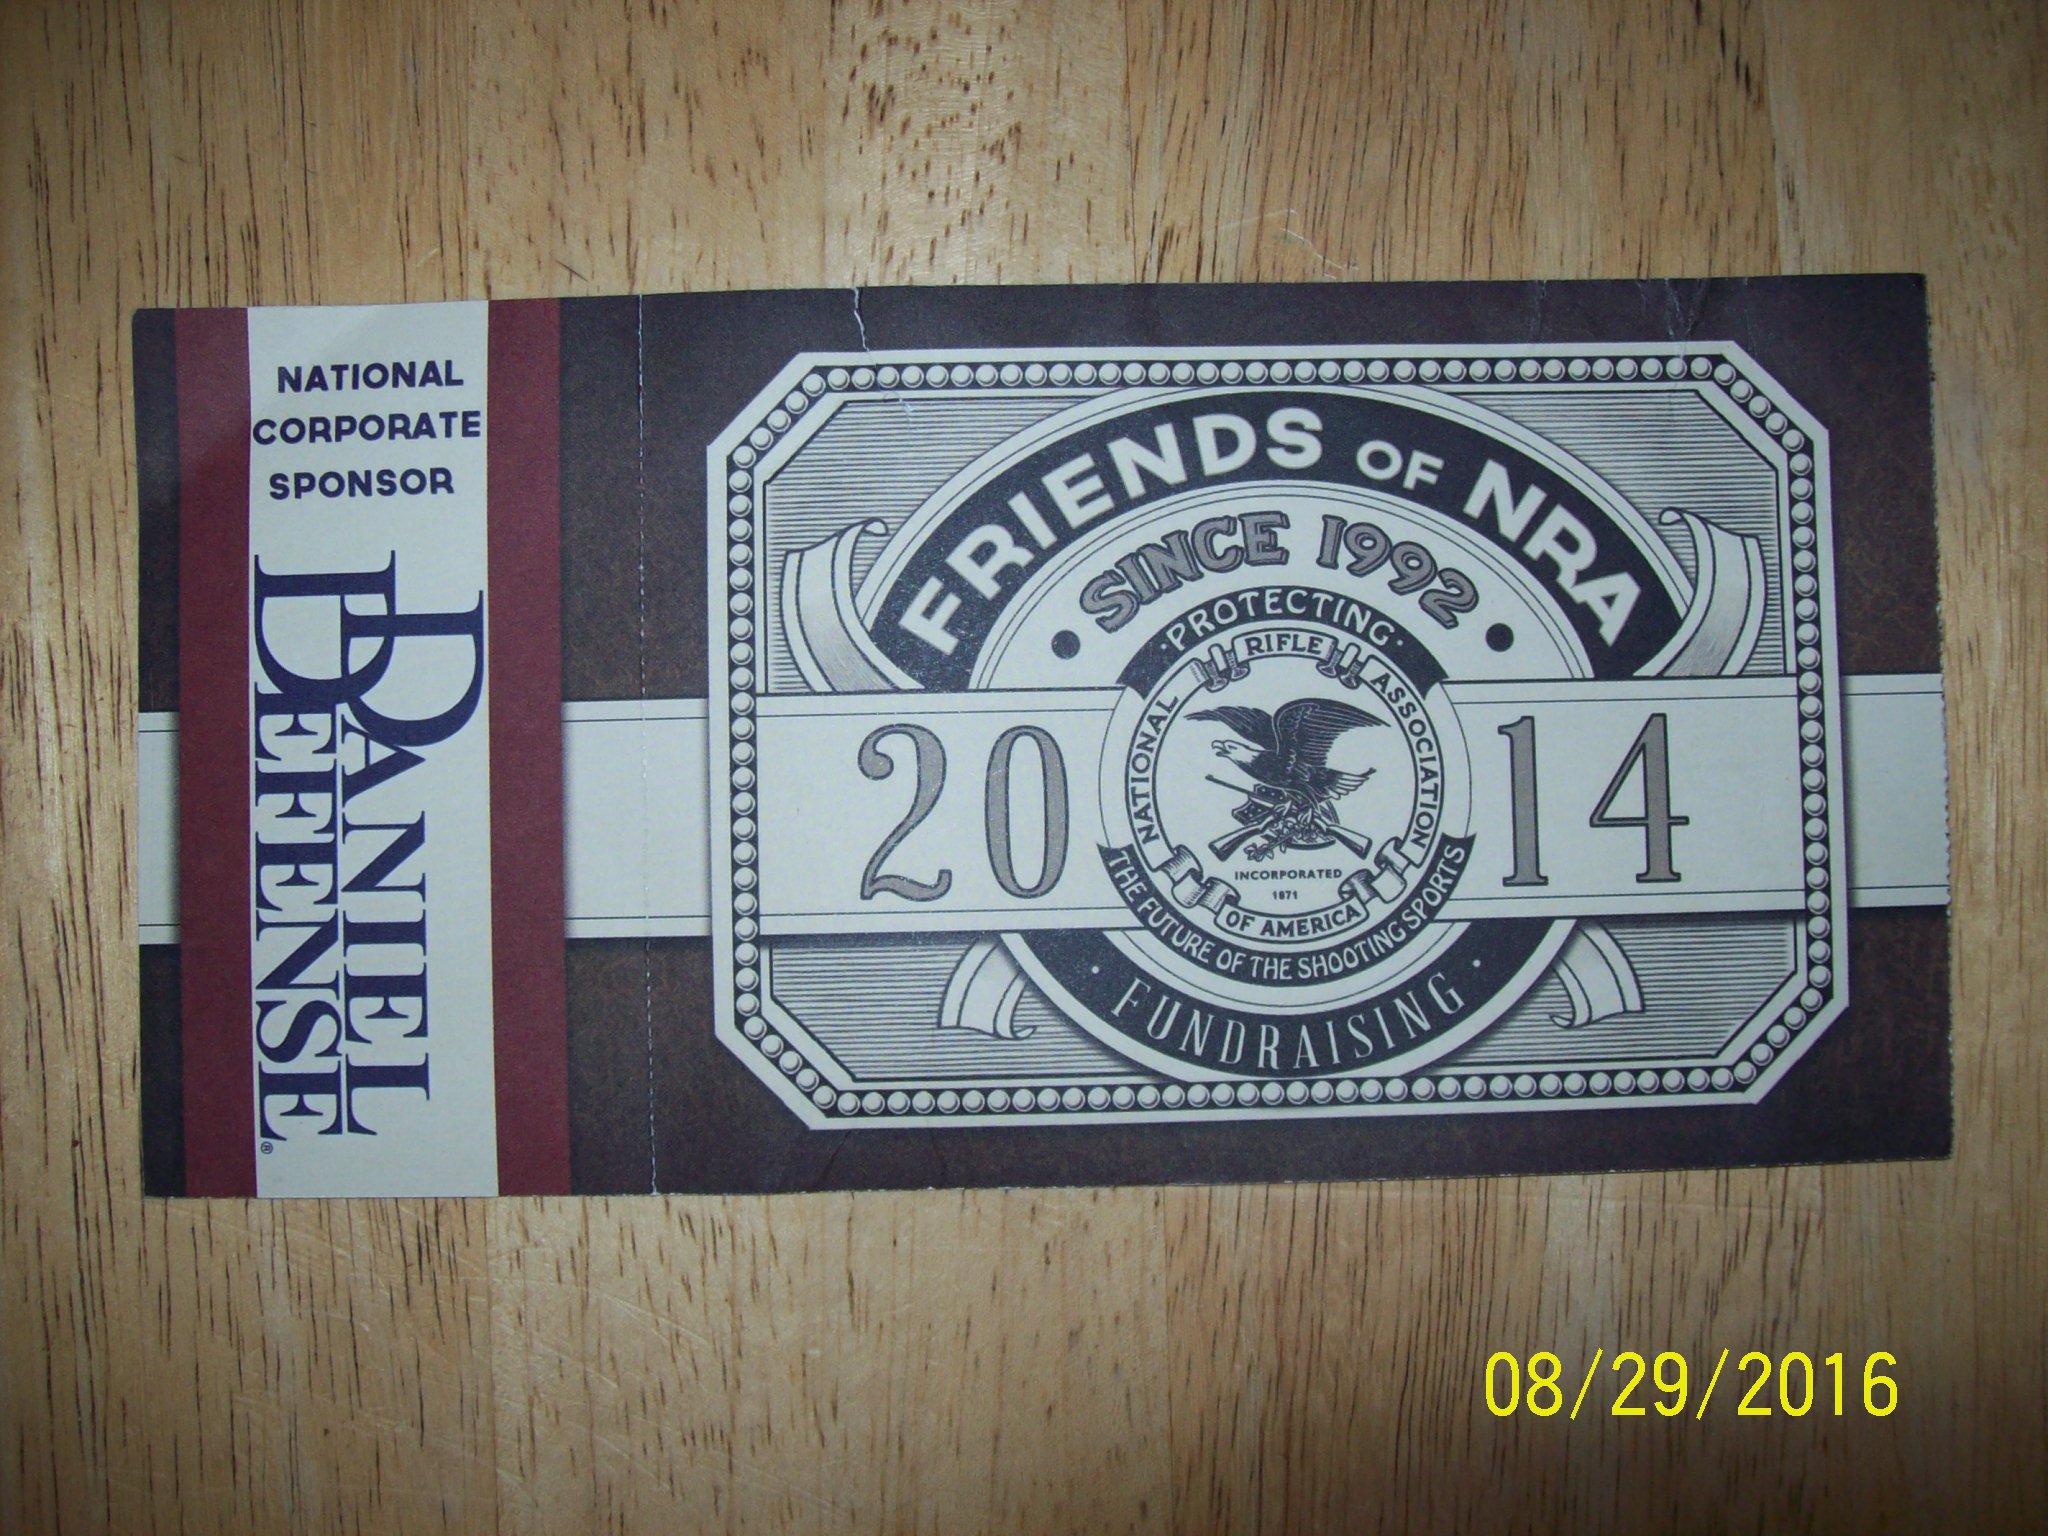 Friends of NRA 20th Anniversary shirt (1994-2014) banquet ticket and 4 stickers